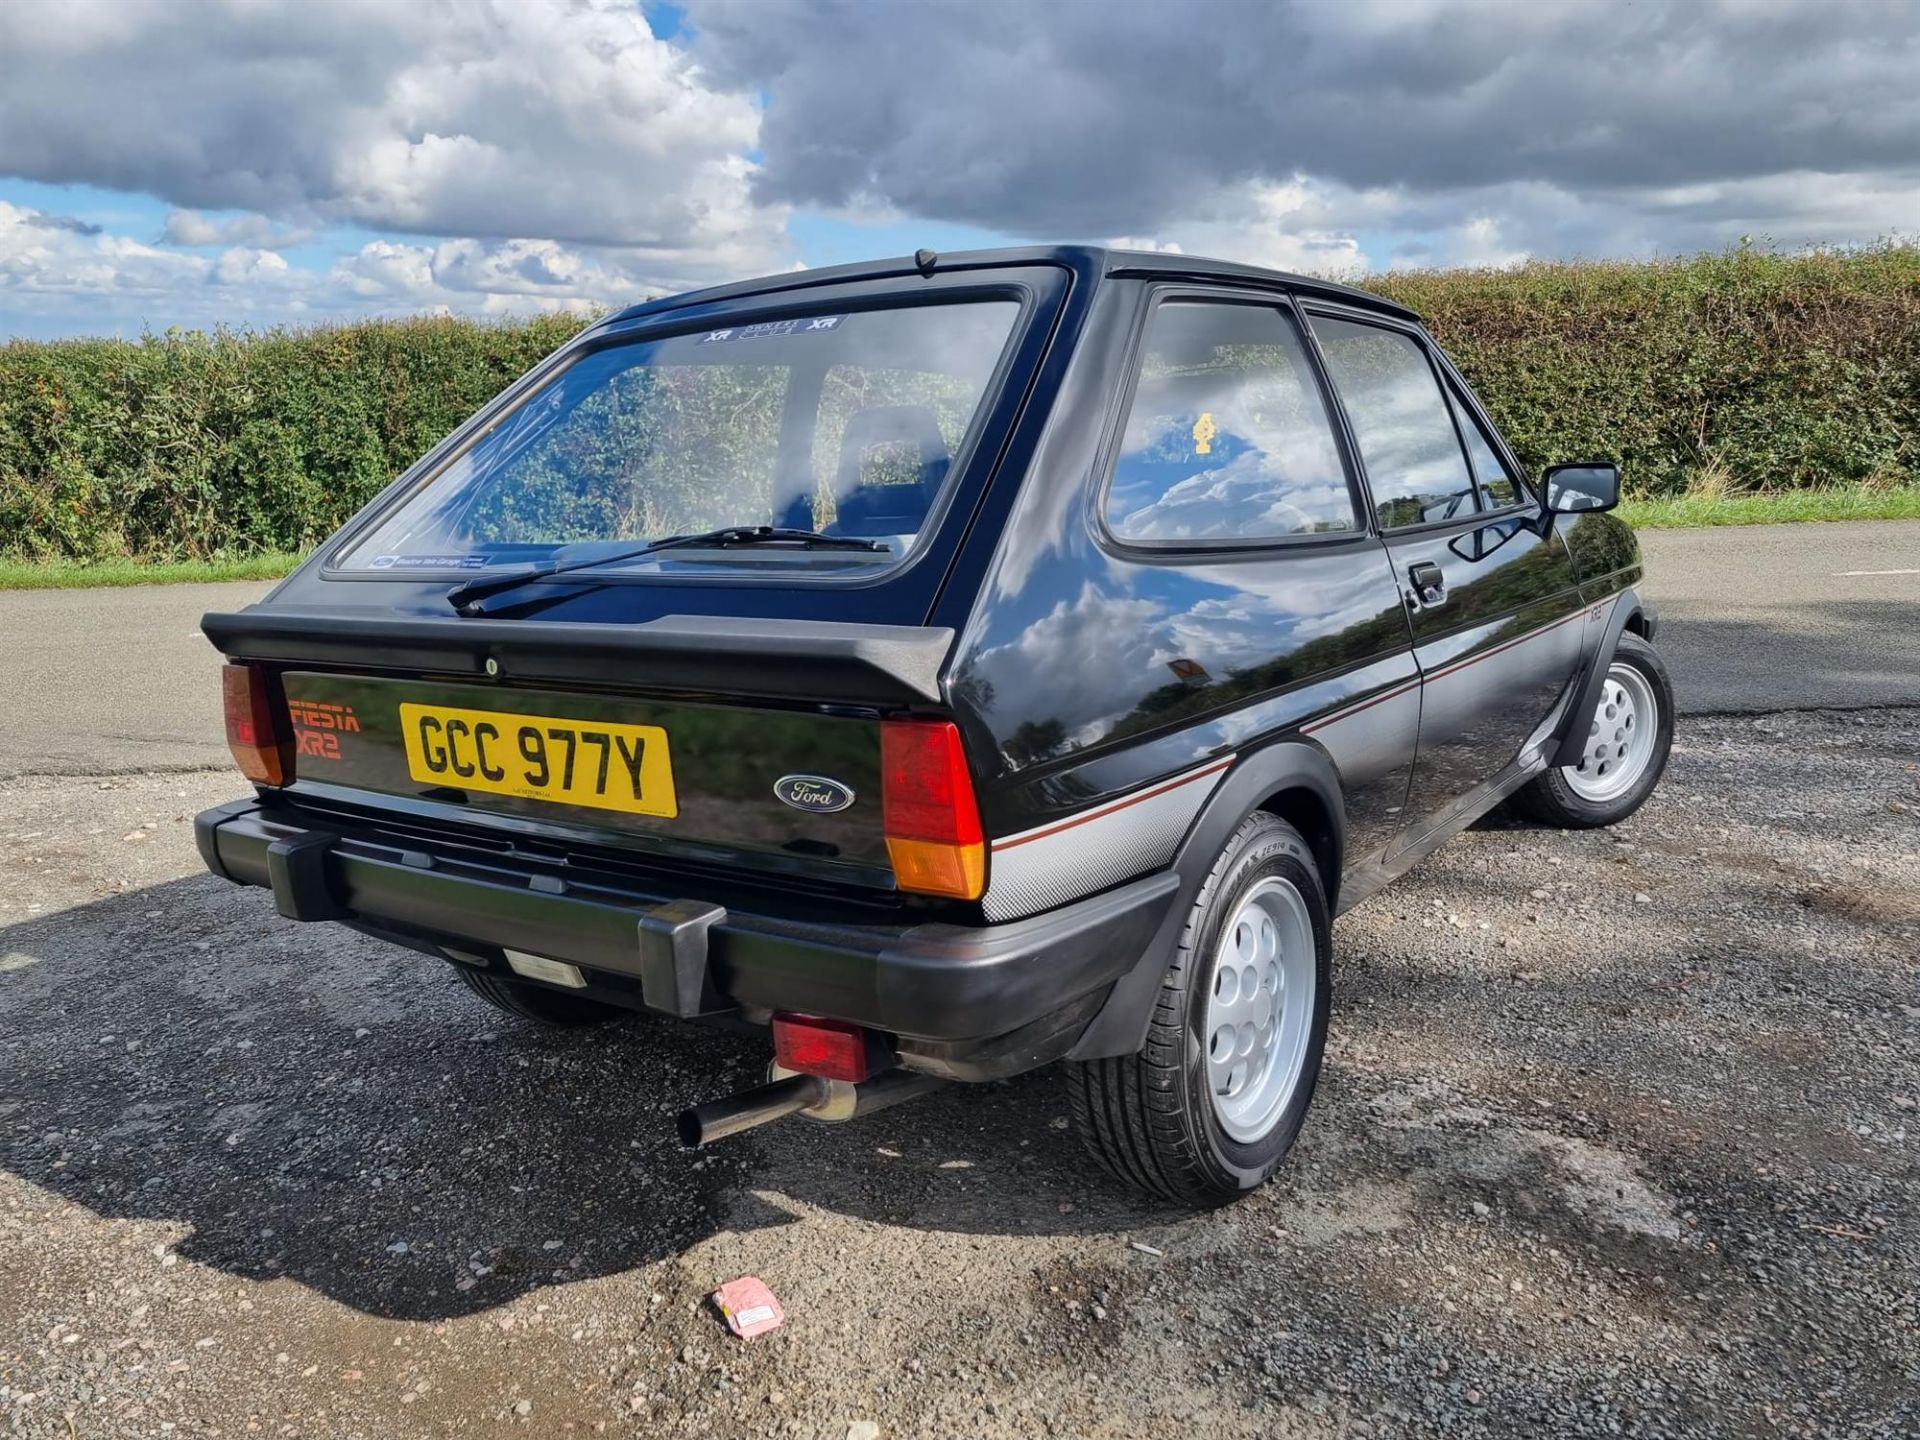 1982 Ford XR2 Mk1 - Image 4 of 10